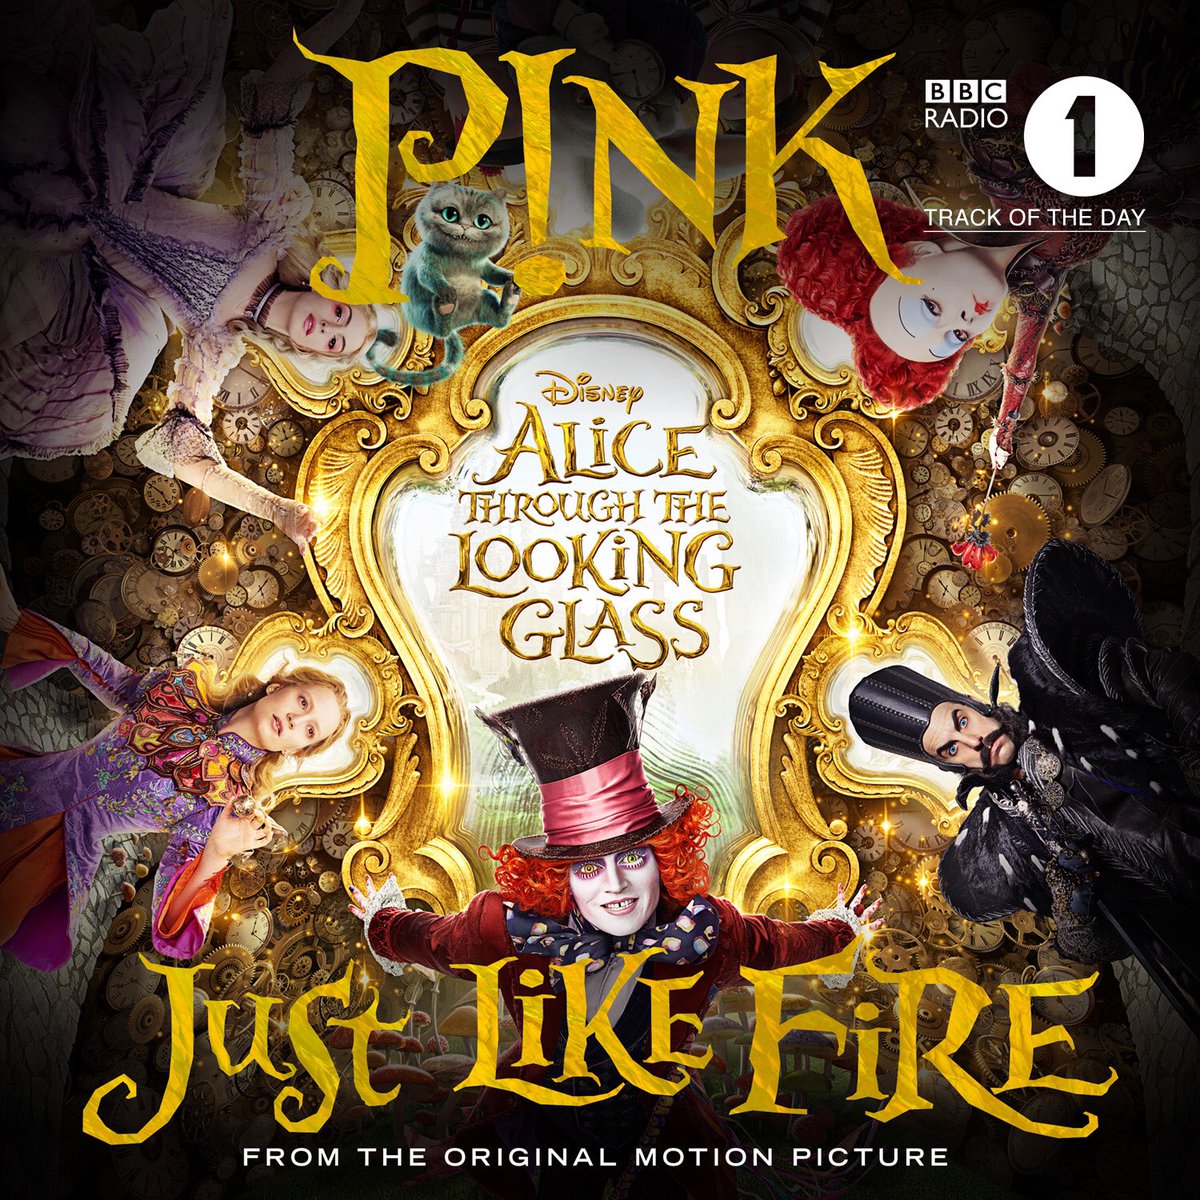 Thanks @BBCR1 for making #JustLikeFire from #ThroughTheLookingGlass your Track of The Day! <3 <3 https://t.co/n8ehQe2N9O